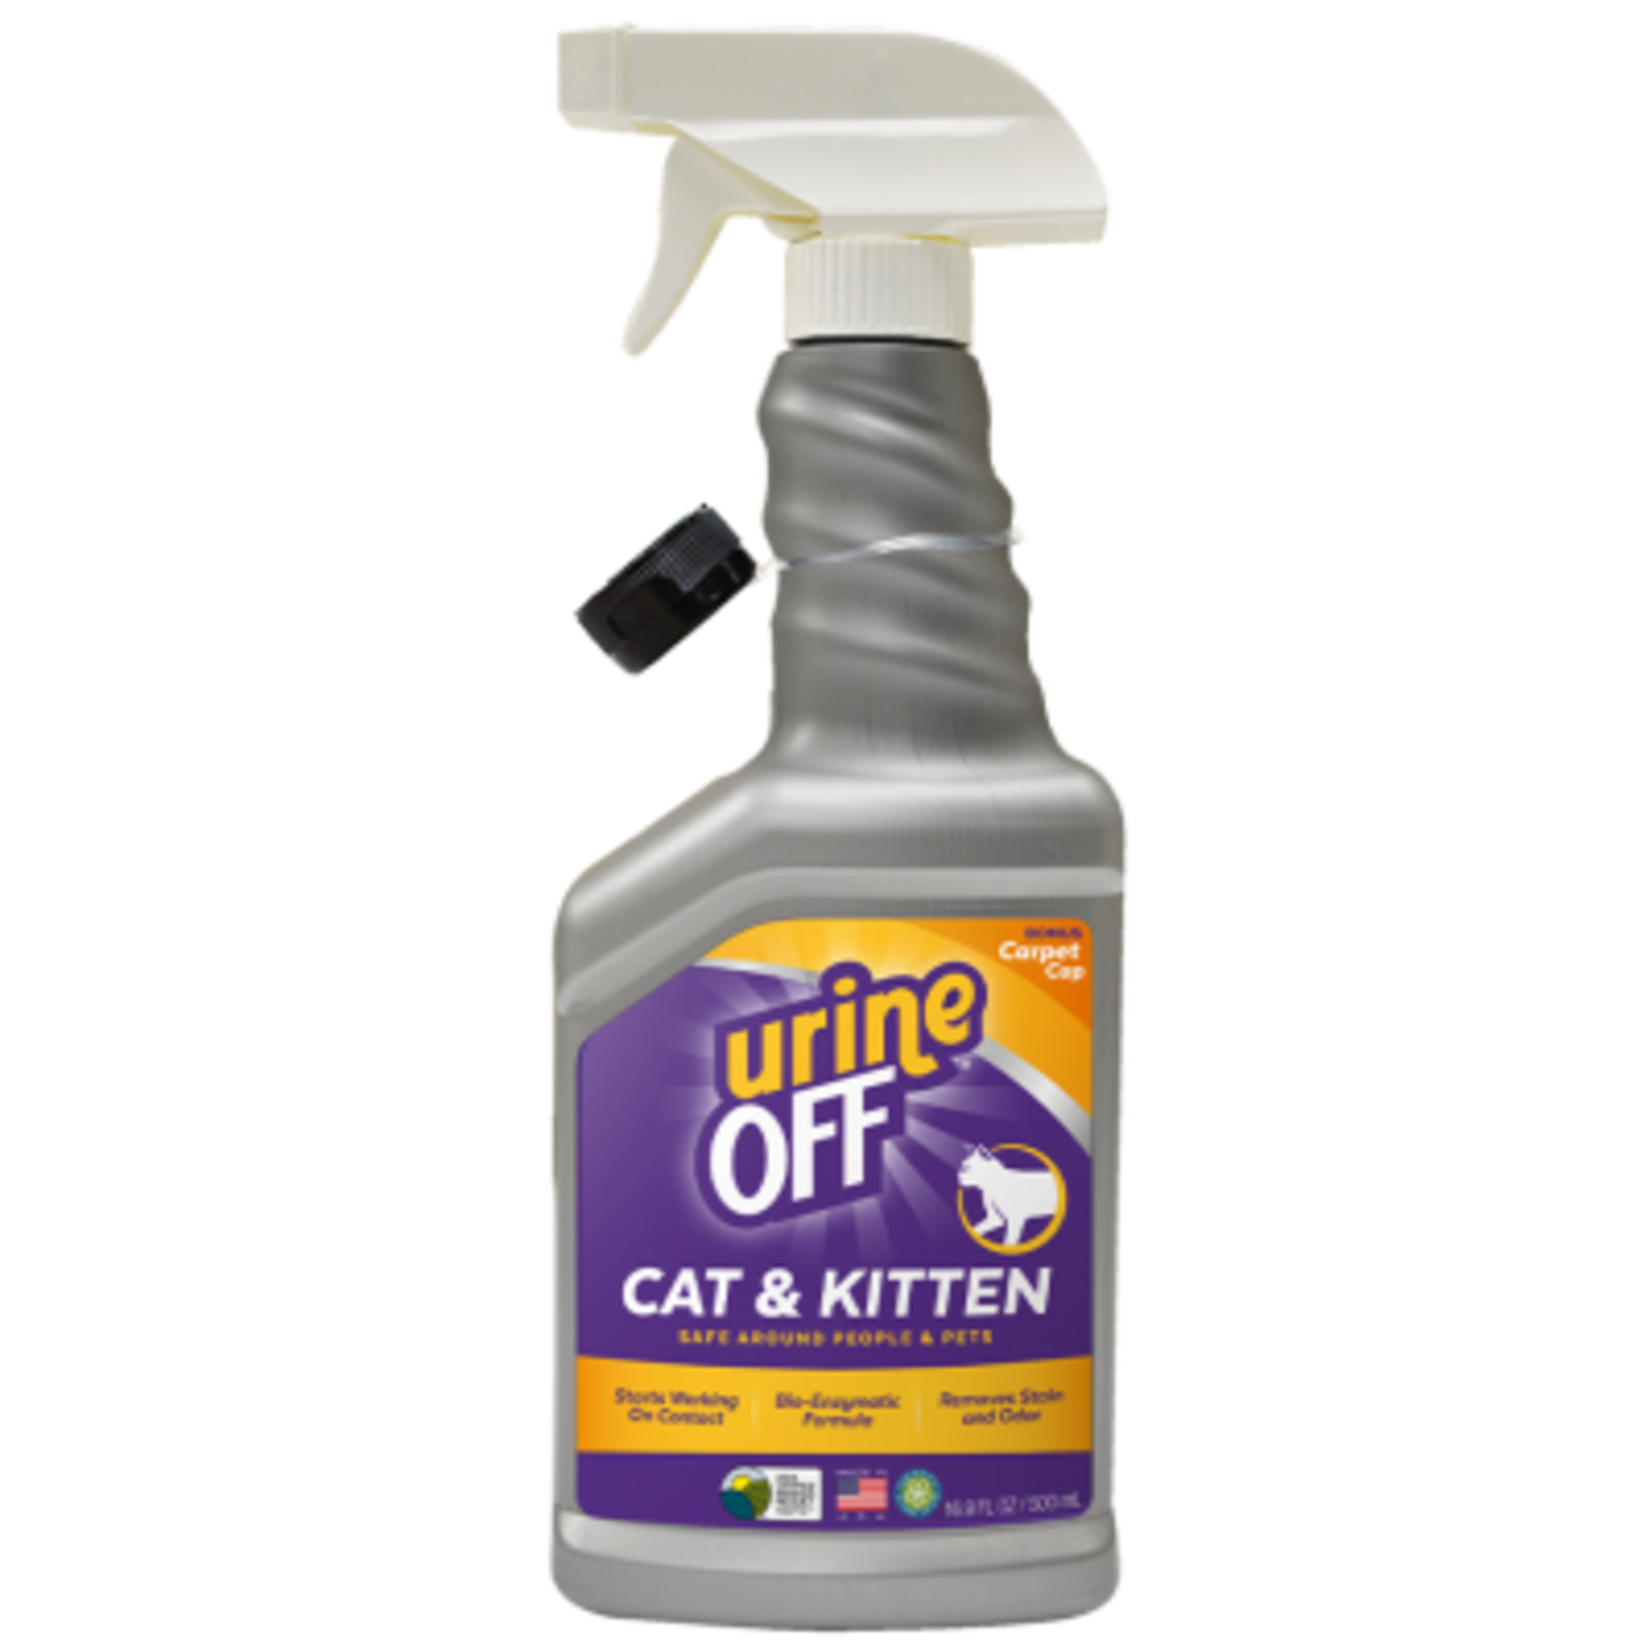 Urine Off Urine Off Cat Kitten Stain and Odor Remover 16.9oz